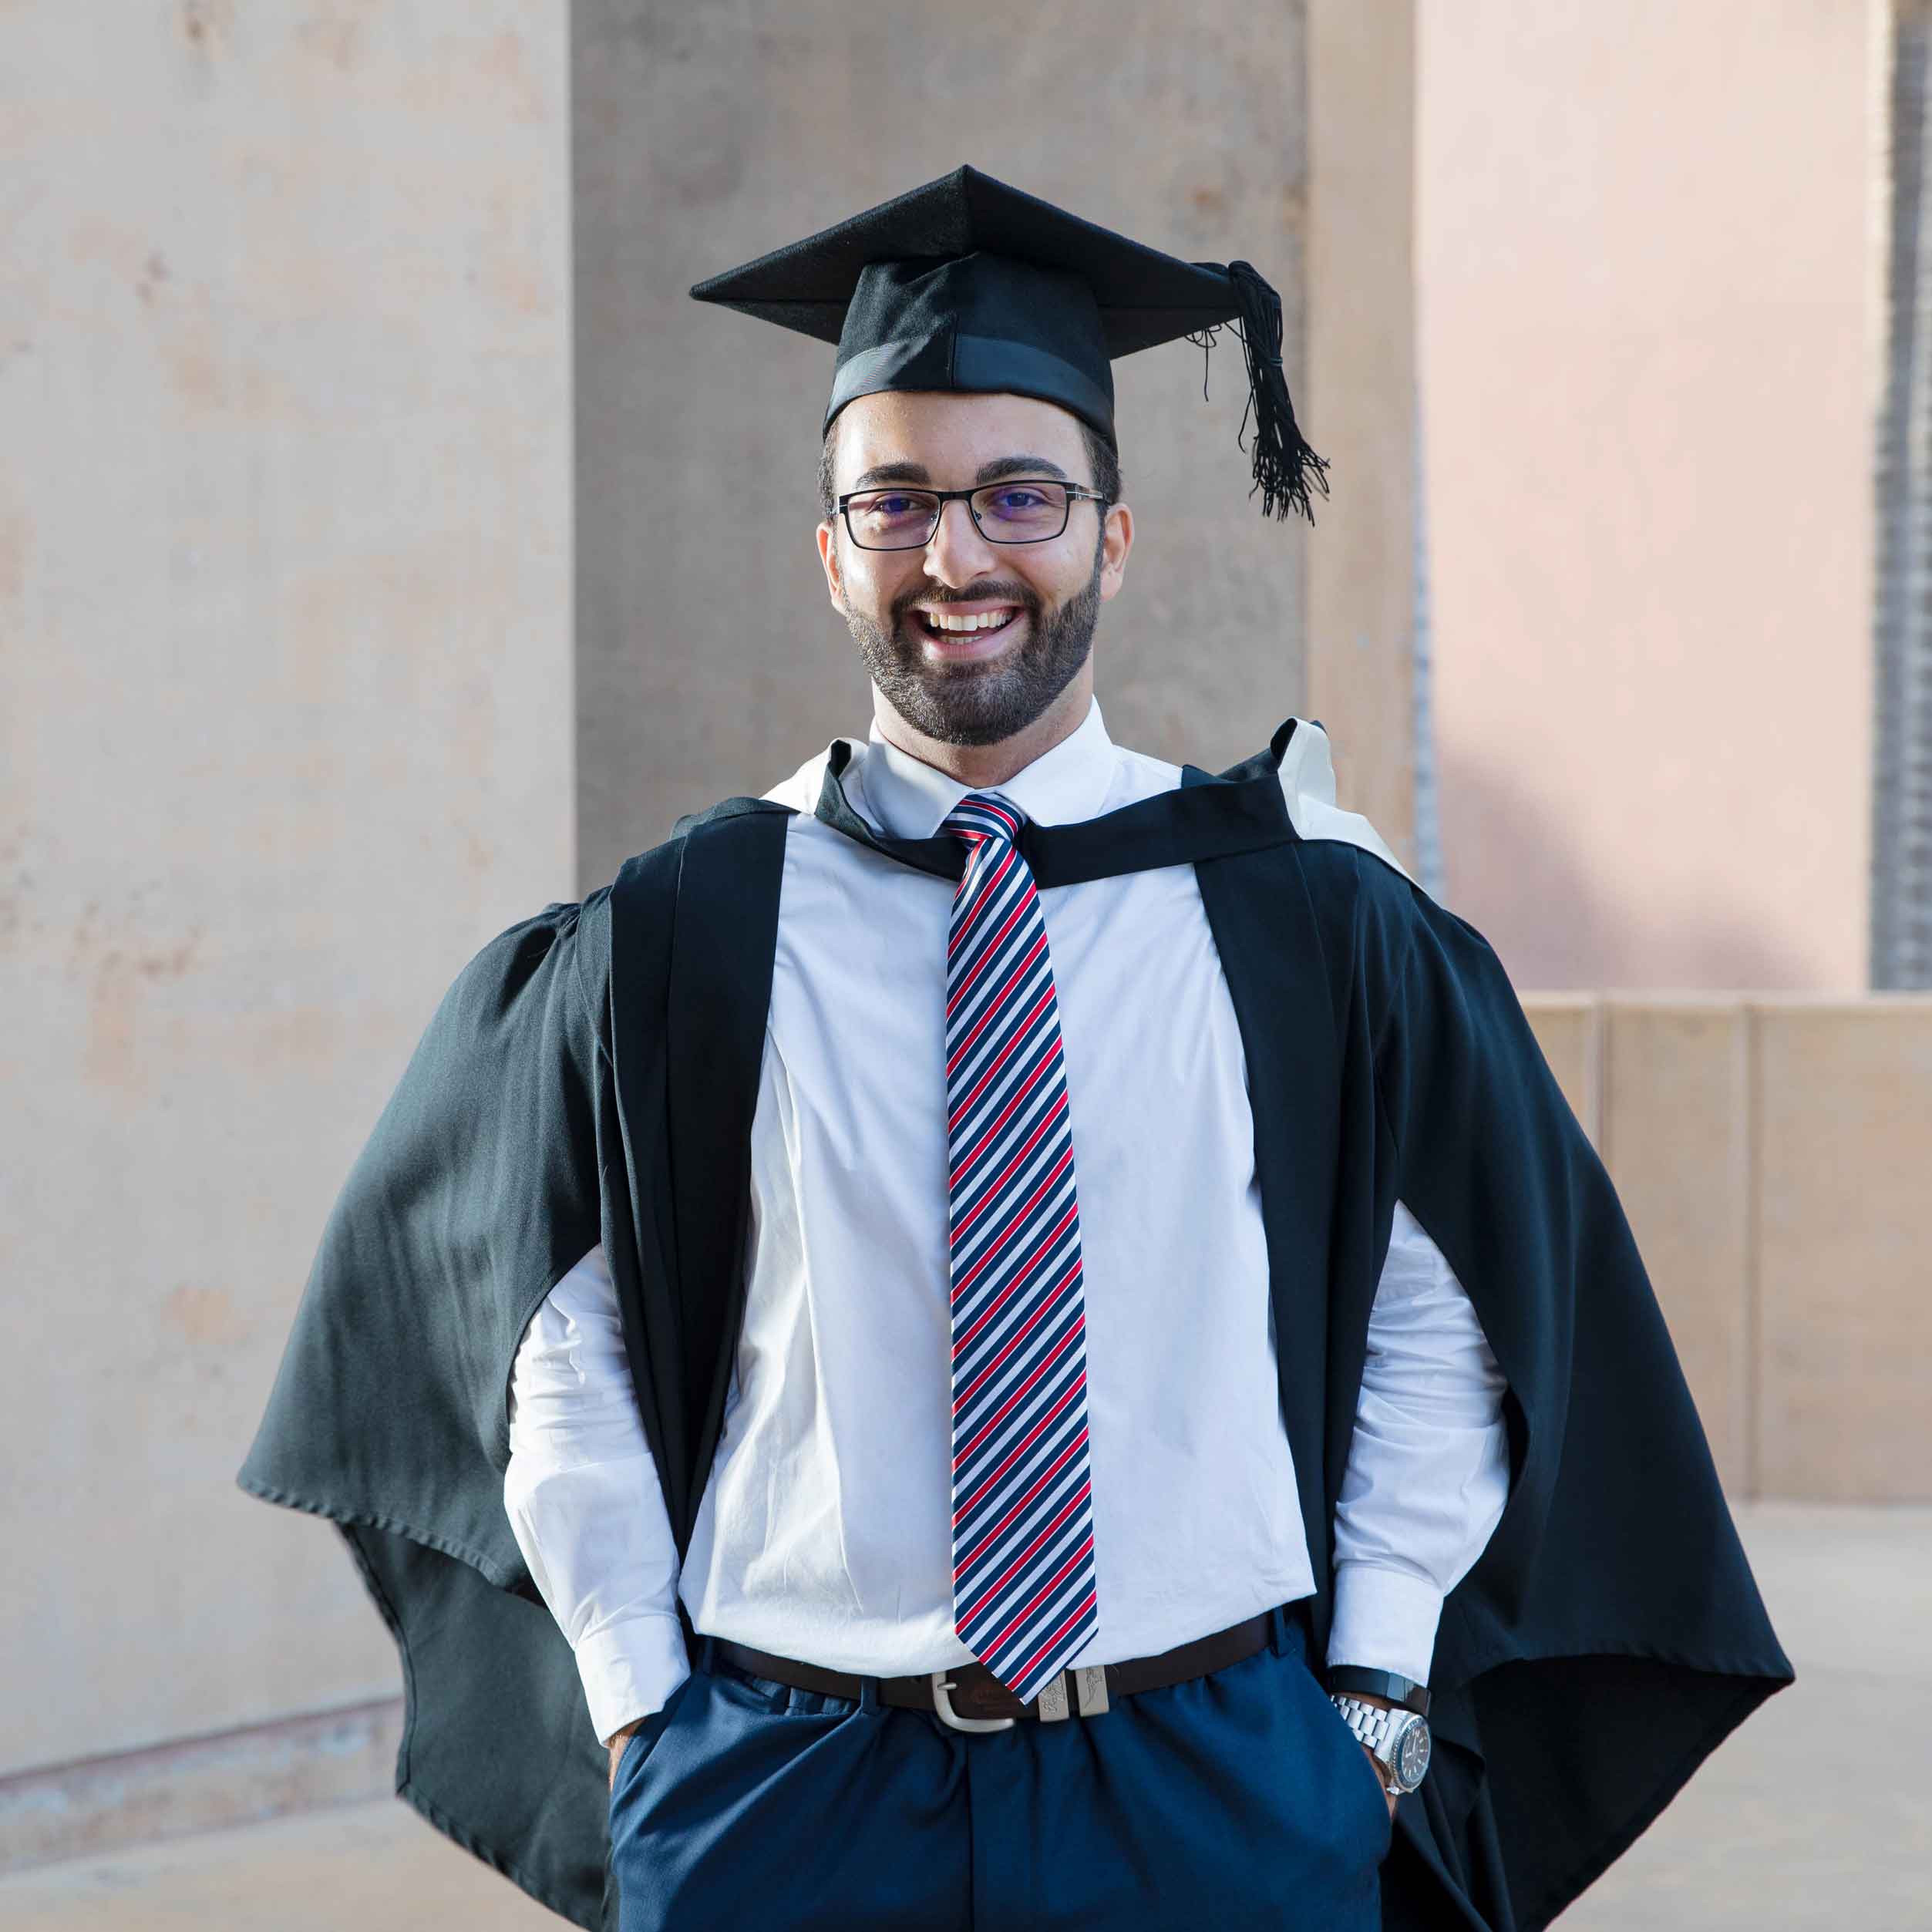 This is an image of 2019 graduate Manny George